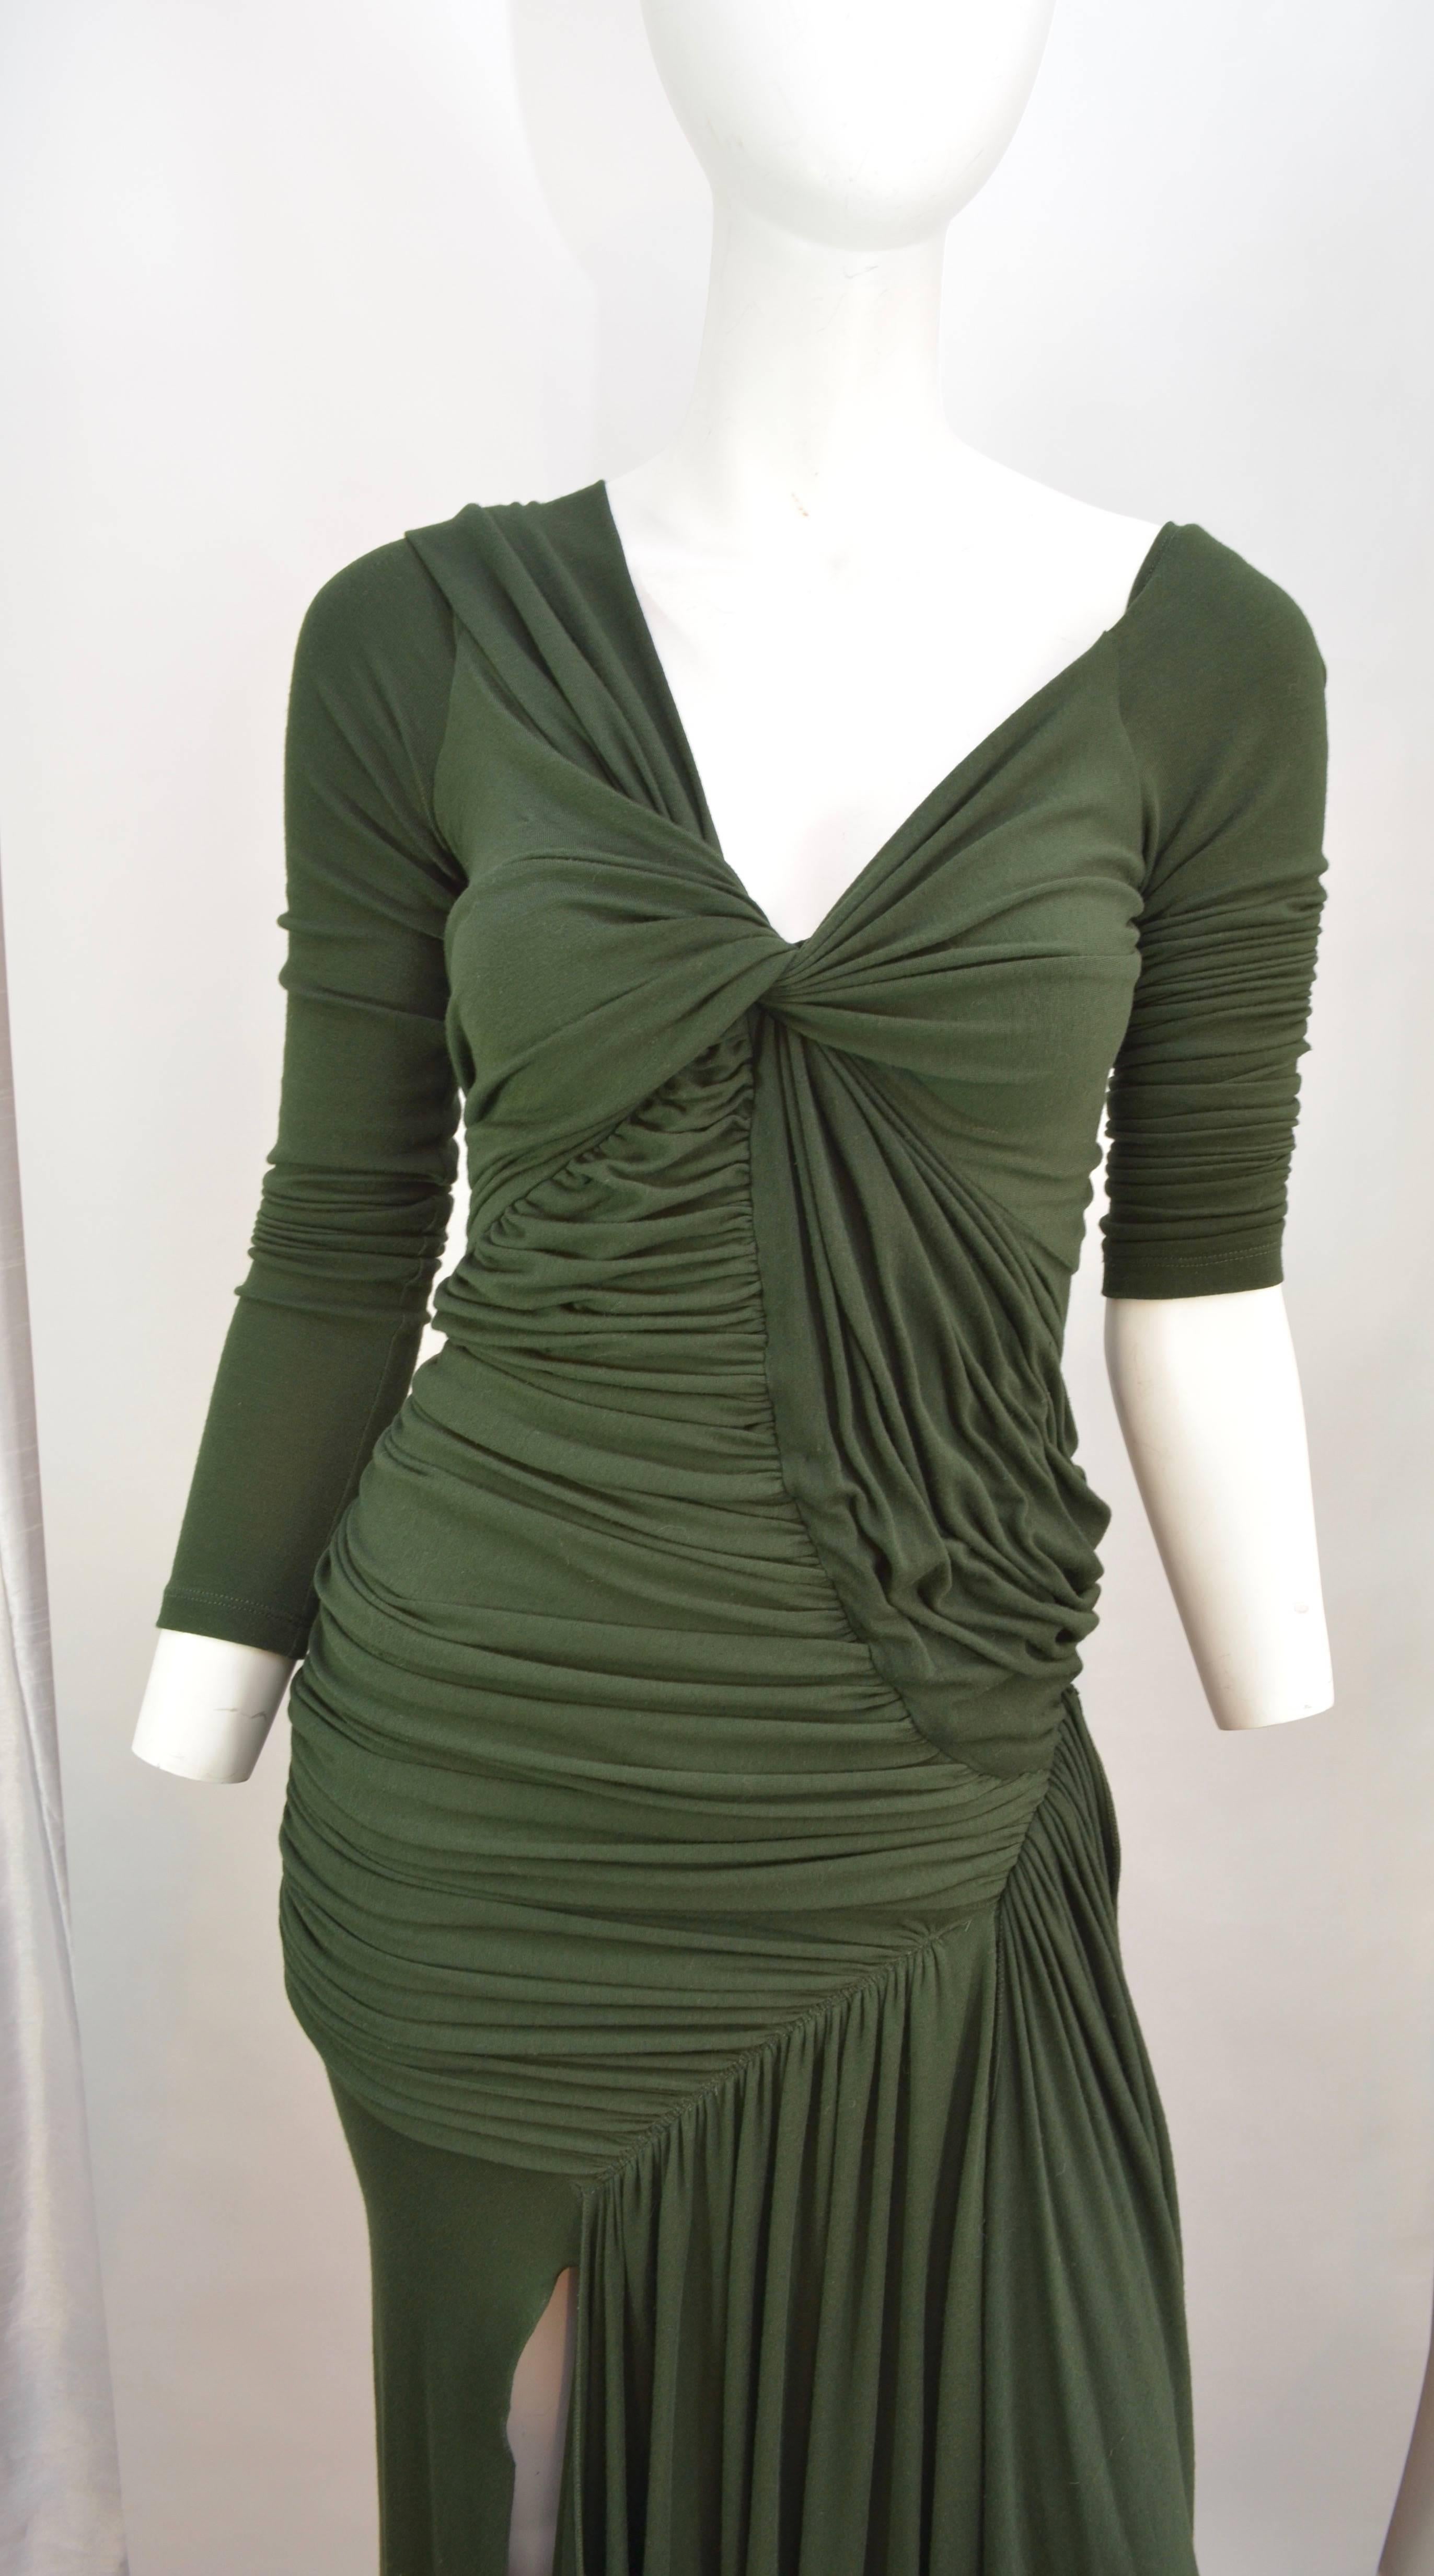 Donna Karan black label ruched evening dress with long sleeves, V neckline and slit up the right leg. Hunter green rayon jersey that is matte and feels like cotton has been ruched and draped in the most flattering way. Dress is in excellent